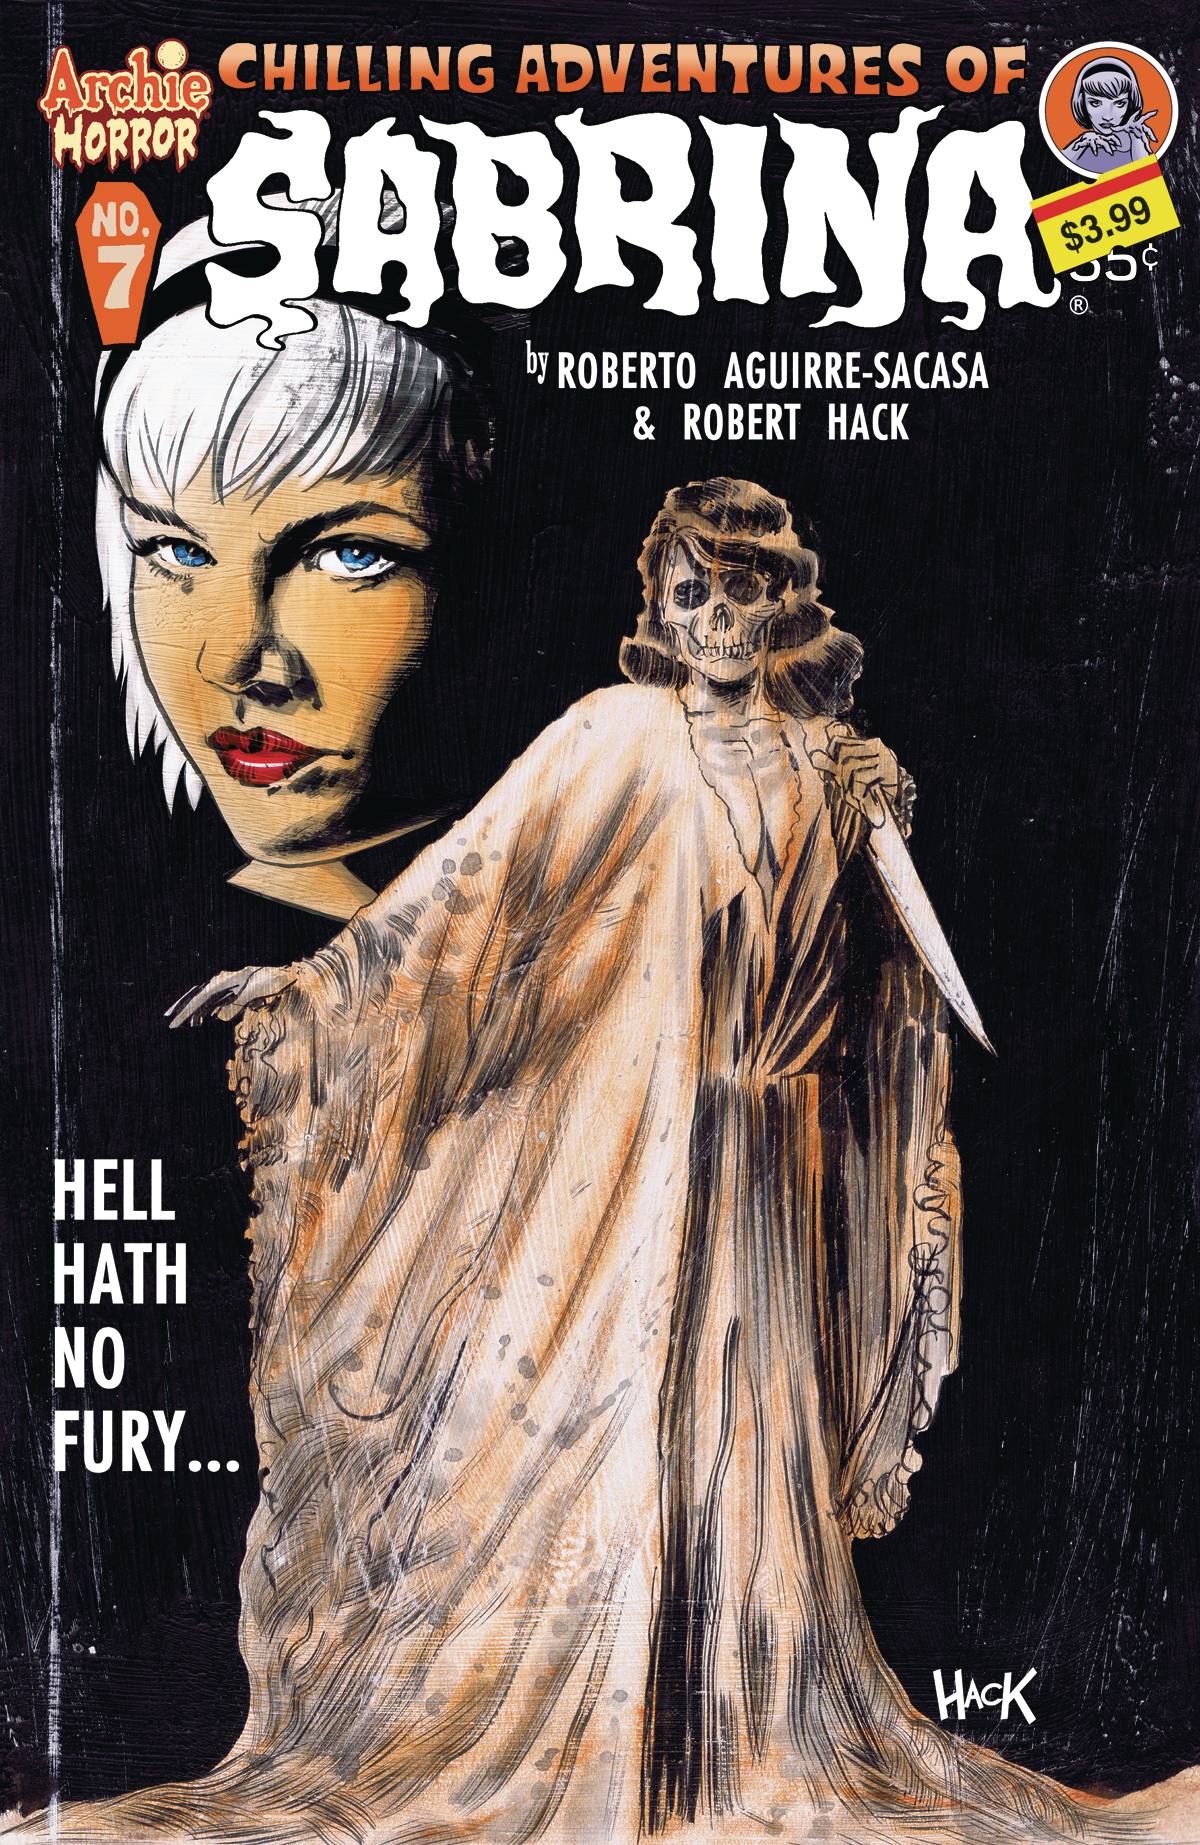 CHILLING ADVENTURES OF SABRINA#7